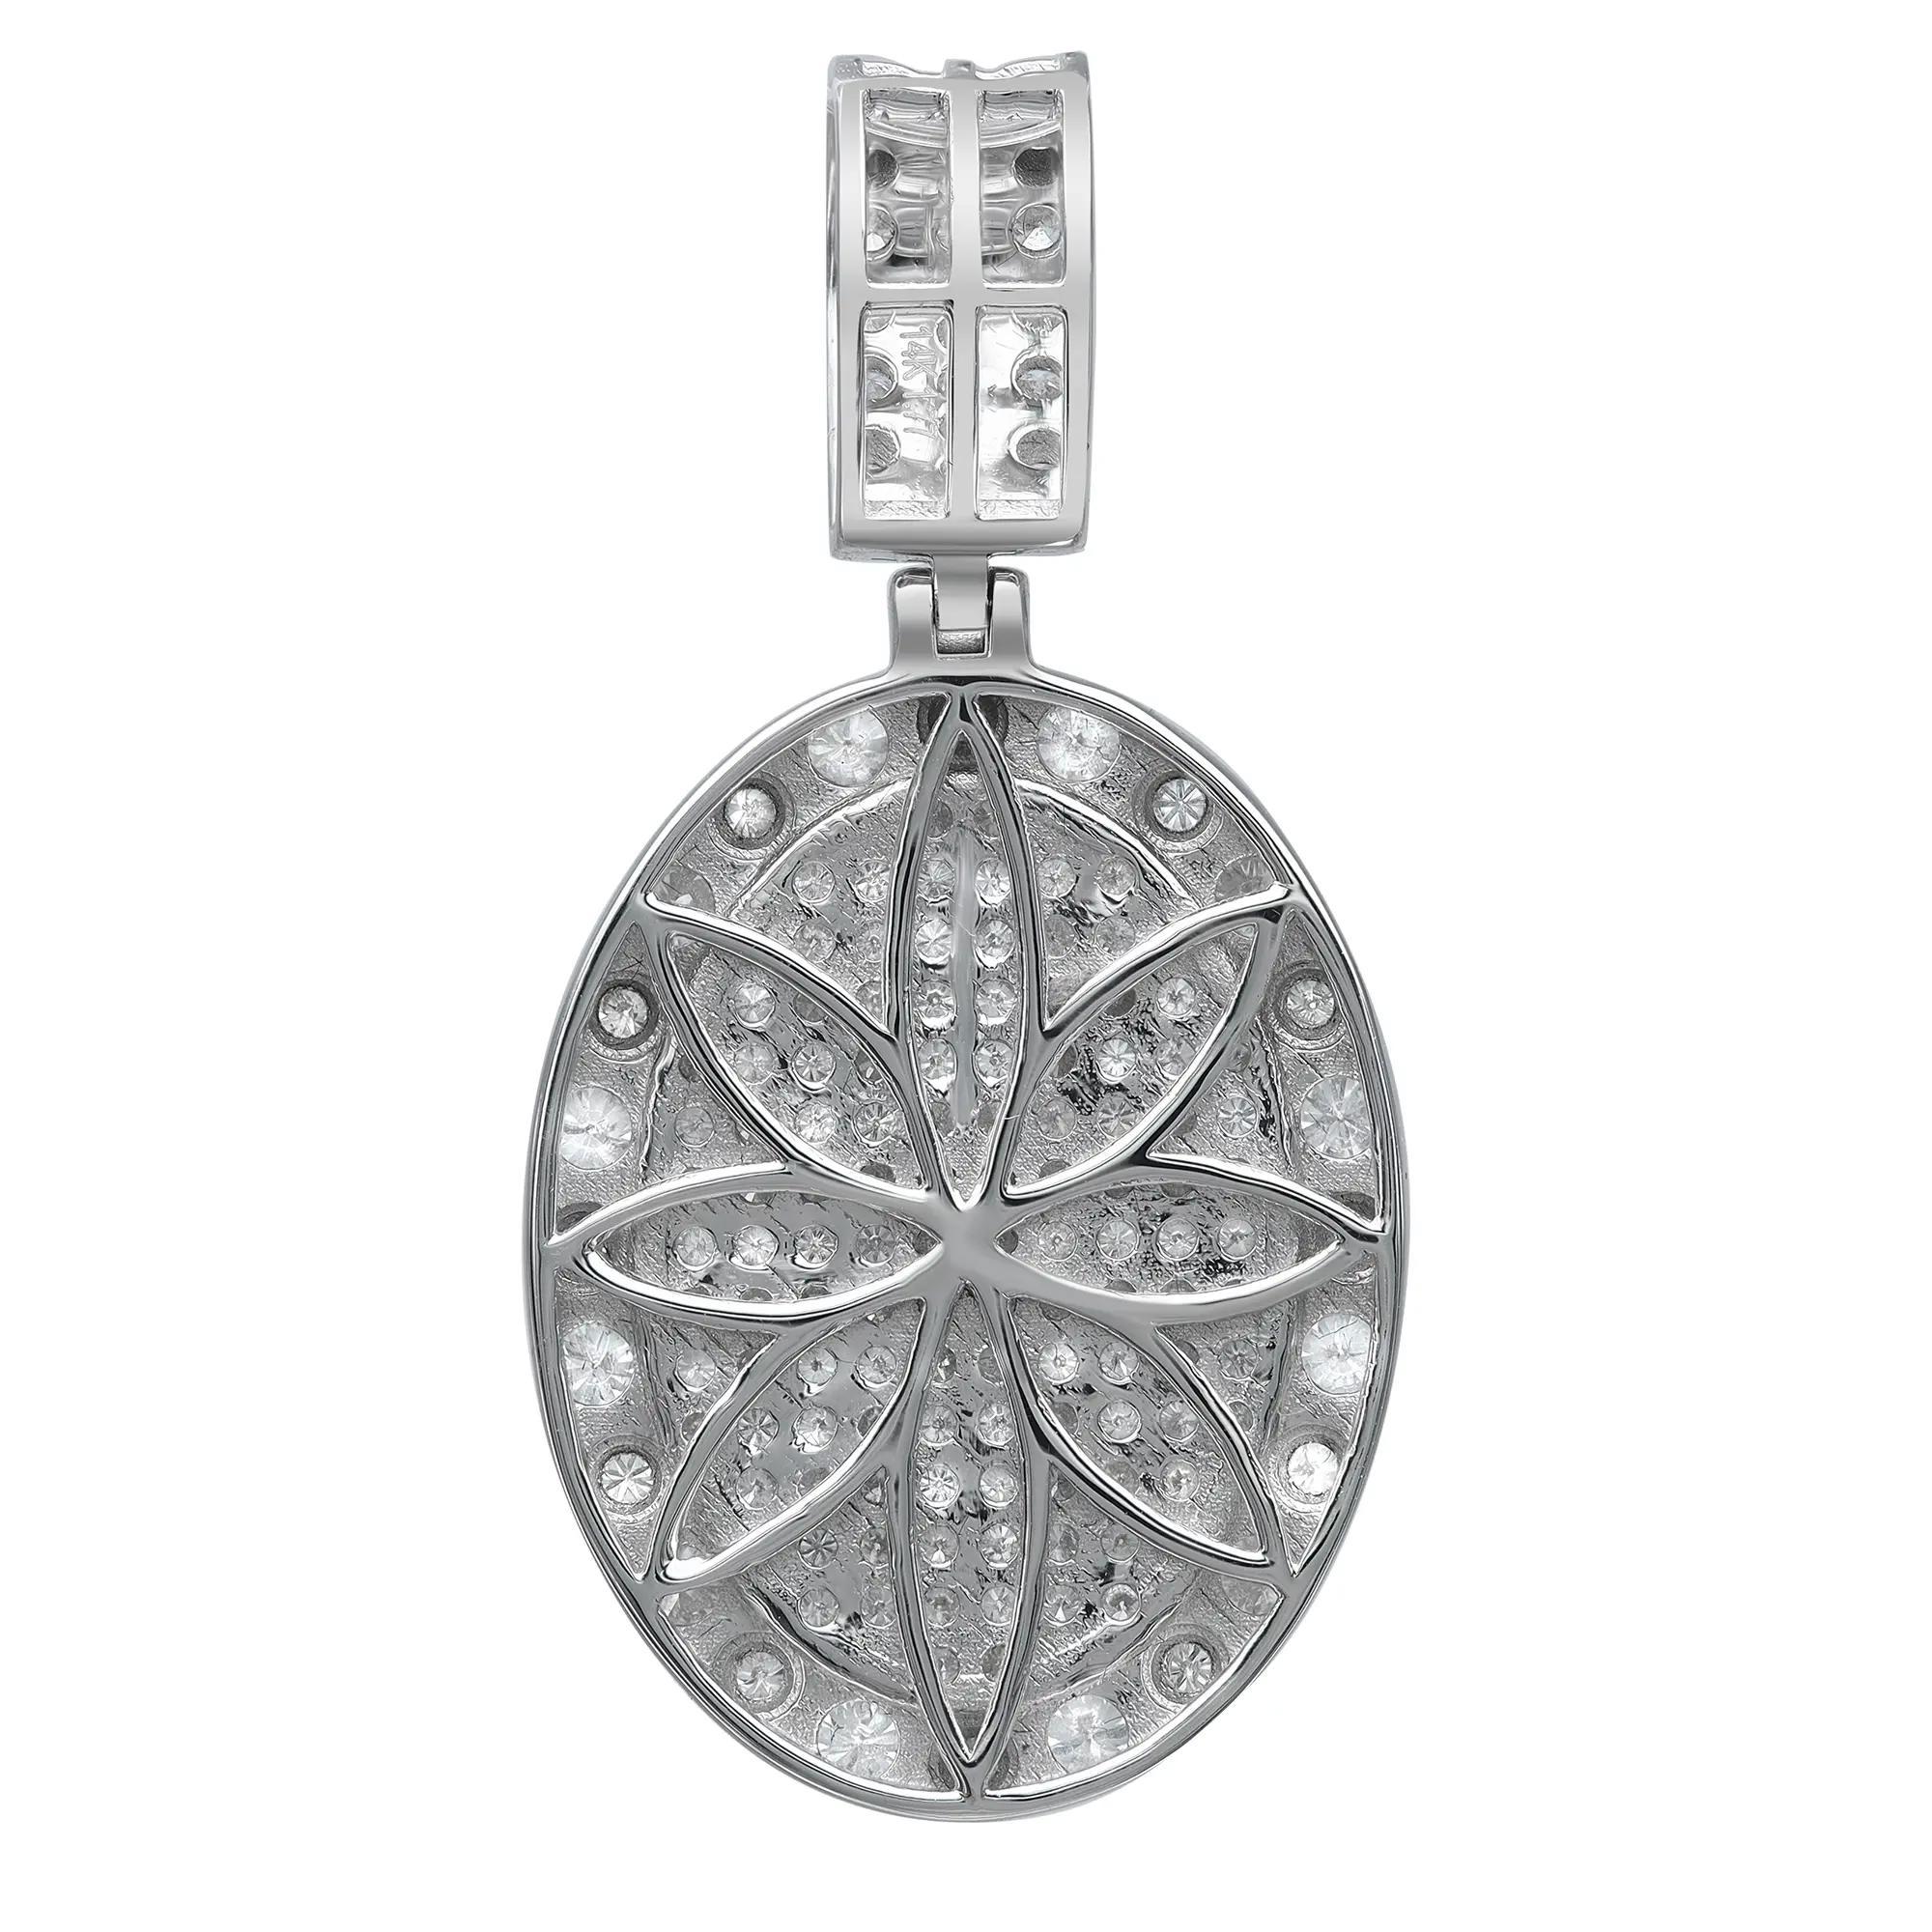 This sparkling oval shape pendant is perfect for any occasion. It features pave and bezel set round brilliant cut diamonds encrusted in an oval shaped shank. Total diamond weight: 1.77 carats. Diamond color G-H and clarity VS-SI. Pendant size: 38mm